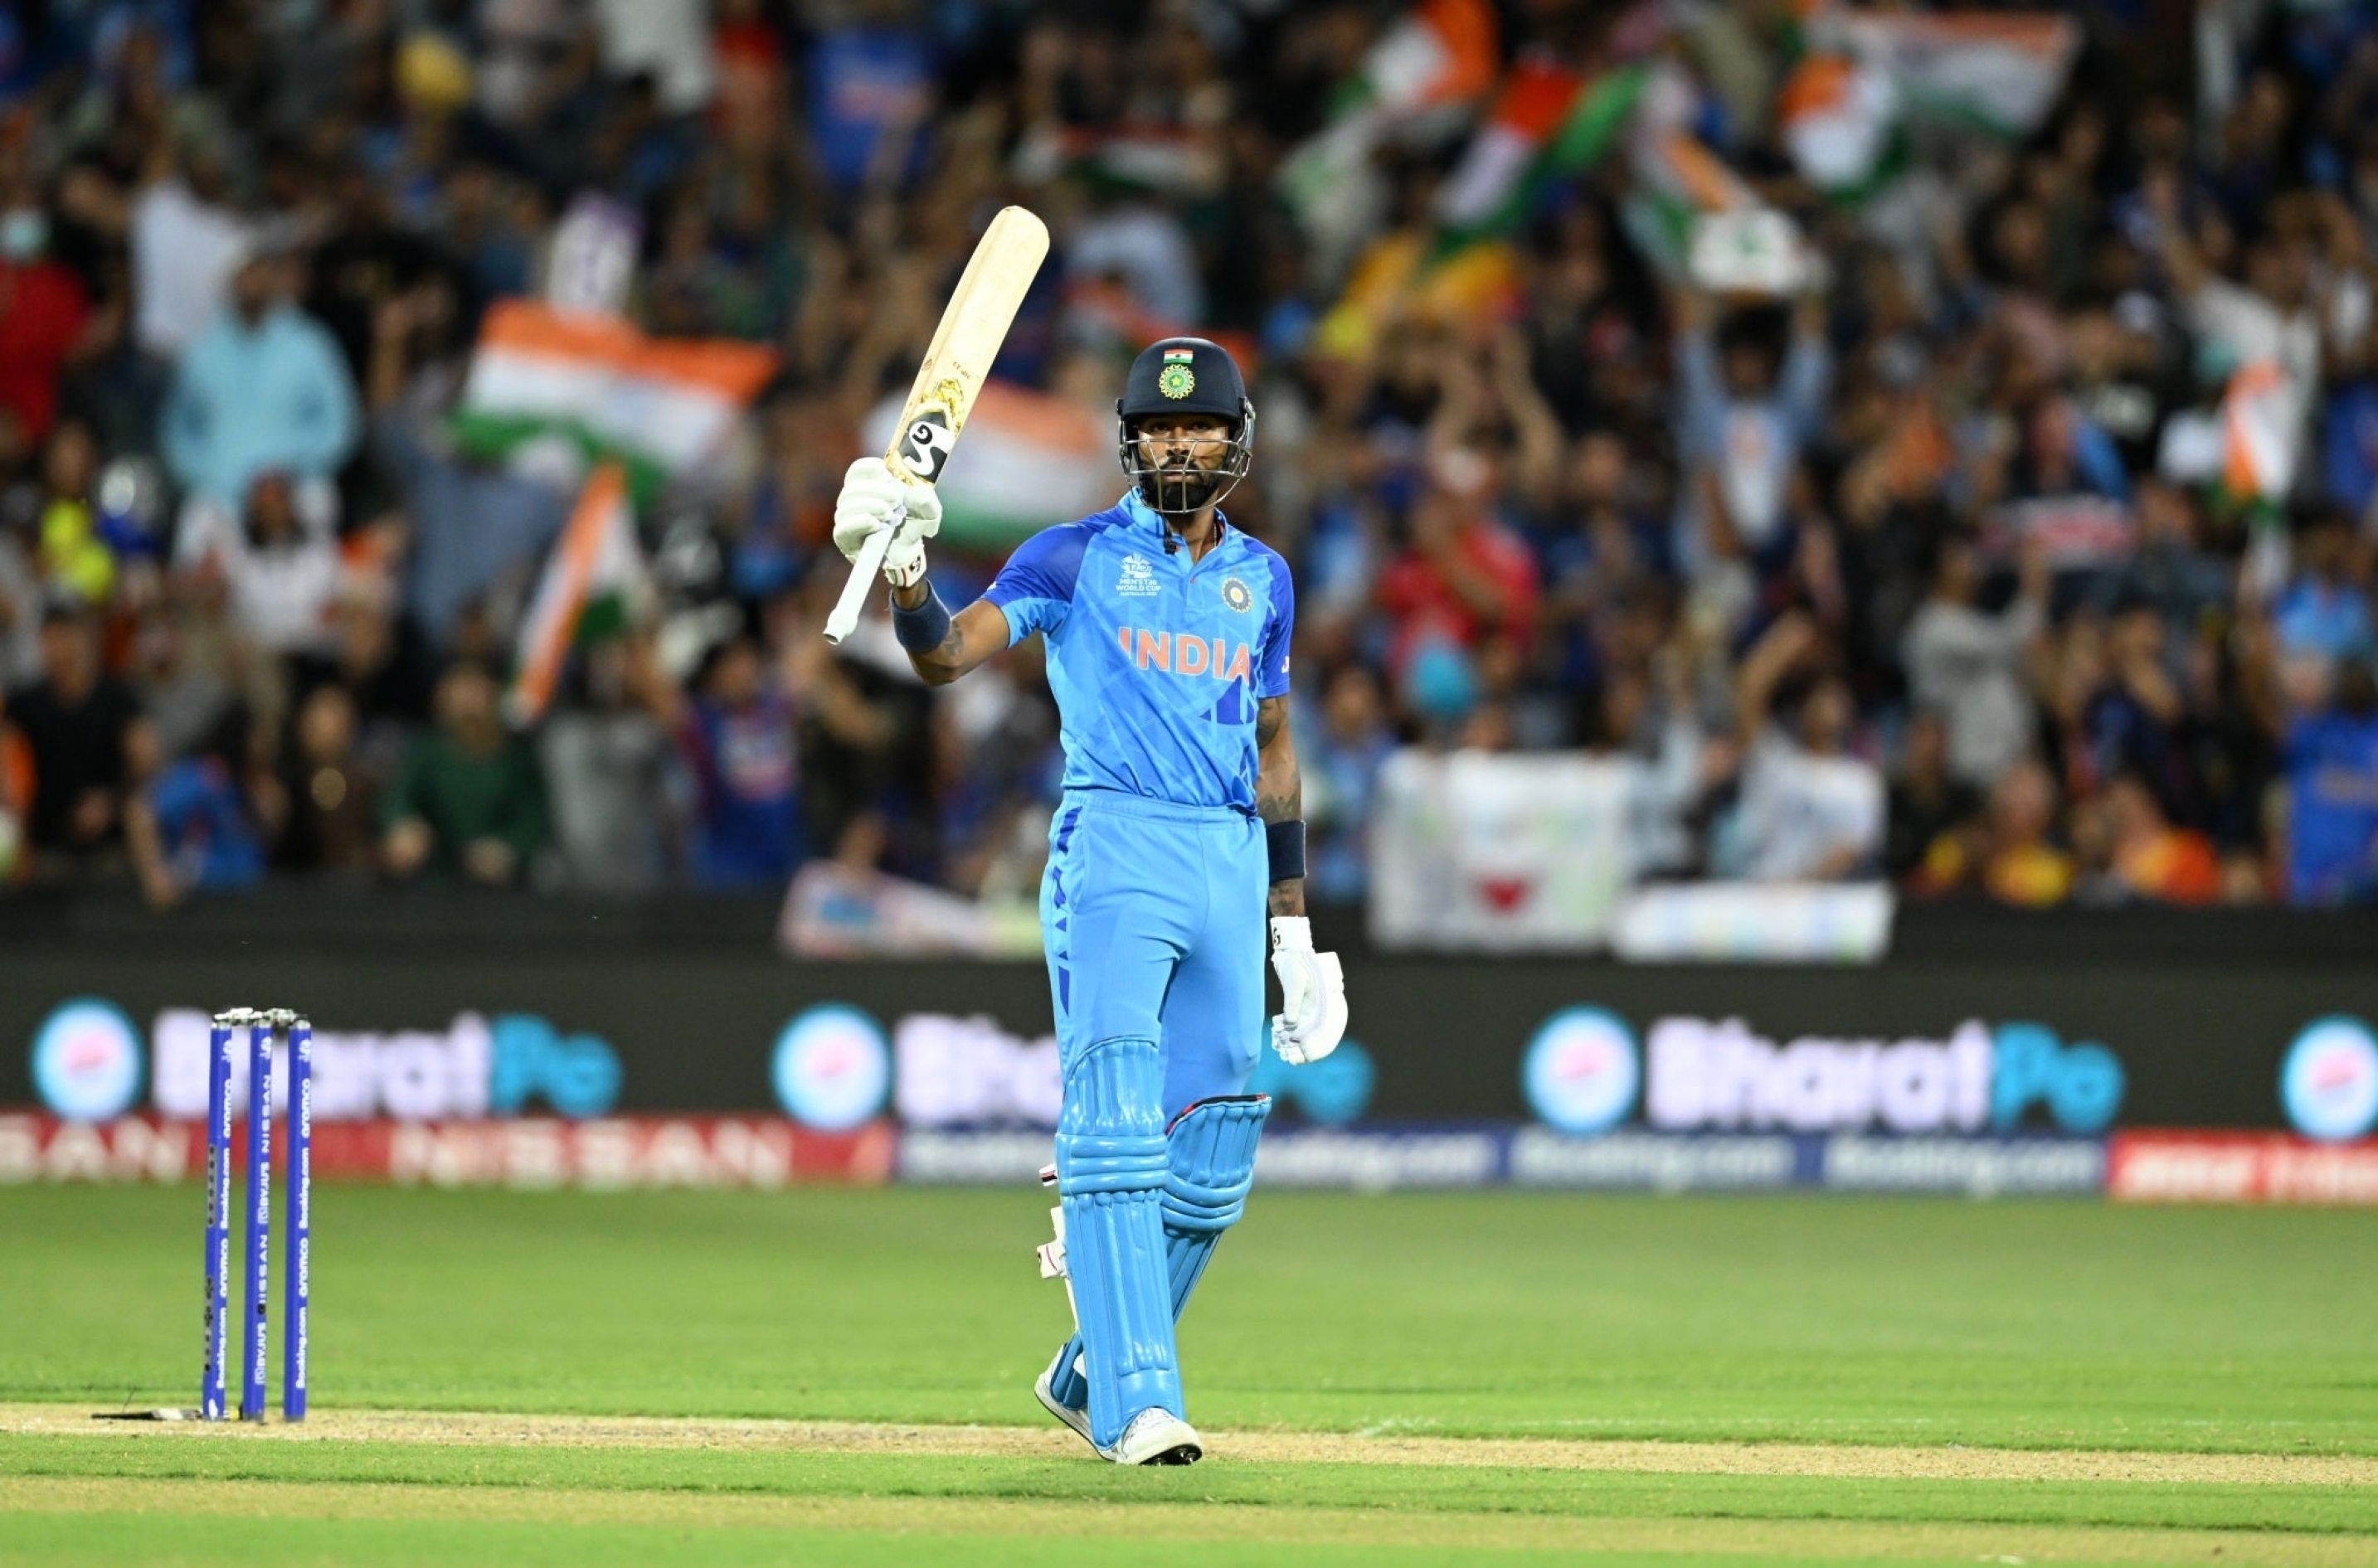 India Cricket T20 Captain: Rohit Sharma likely to quit T20s, Hardik Pandya to be India's next NEW T20 Captain, IND vs NZ LIVE, Indian Cricket Team 